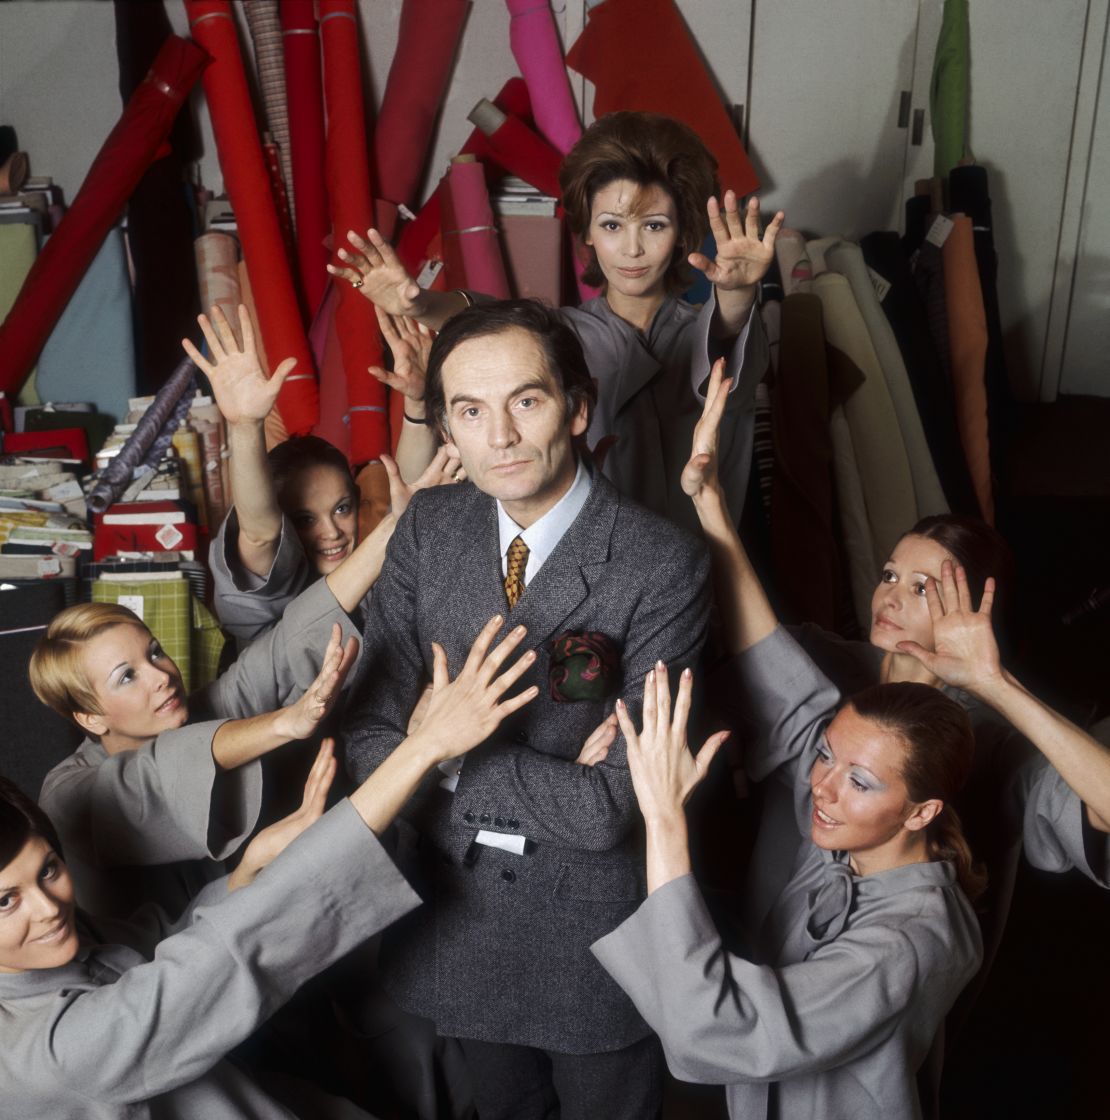 Pierre Cardin stands in his studio surrounded by models.